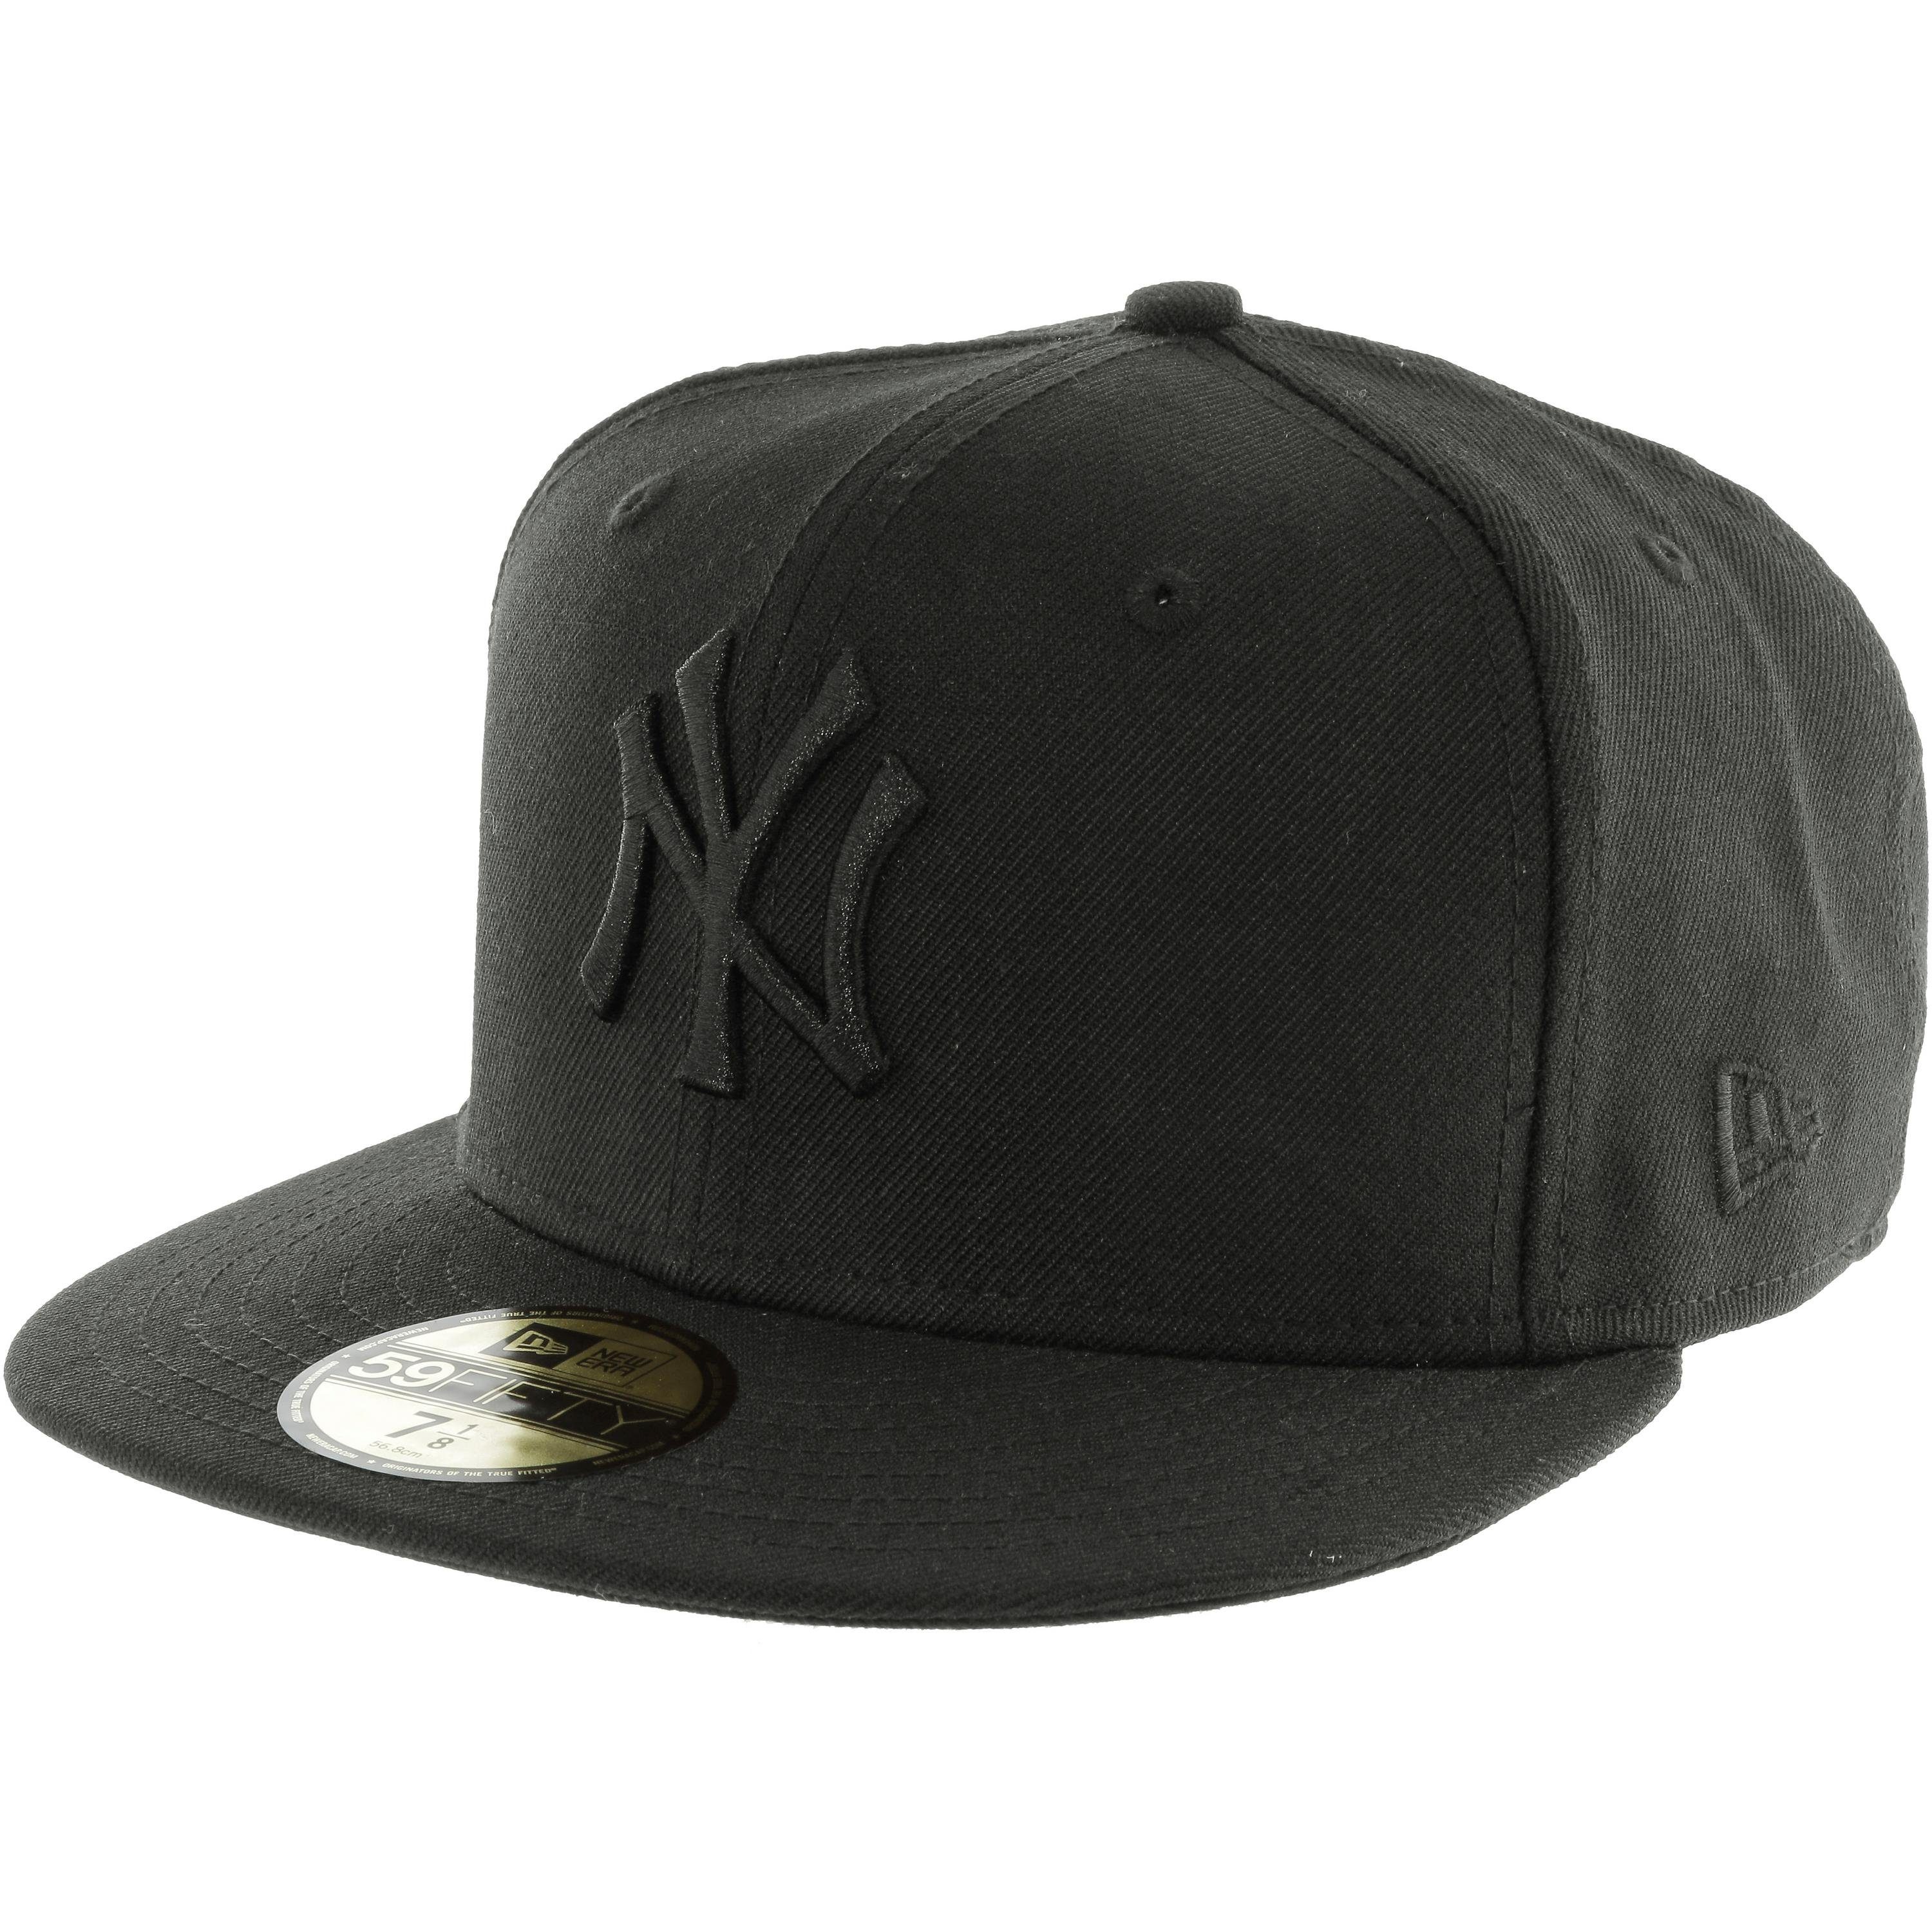 Yankees New Cap 59fifty schwarz Fitted NY Era